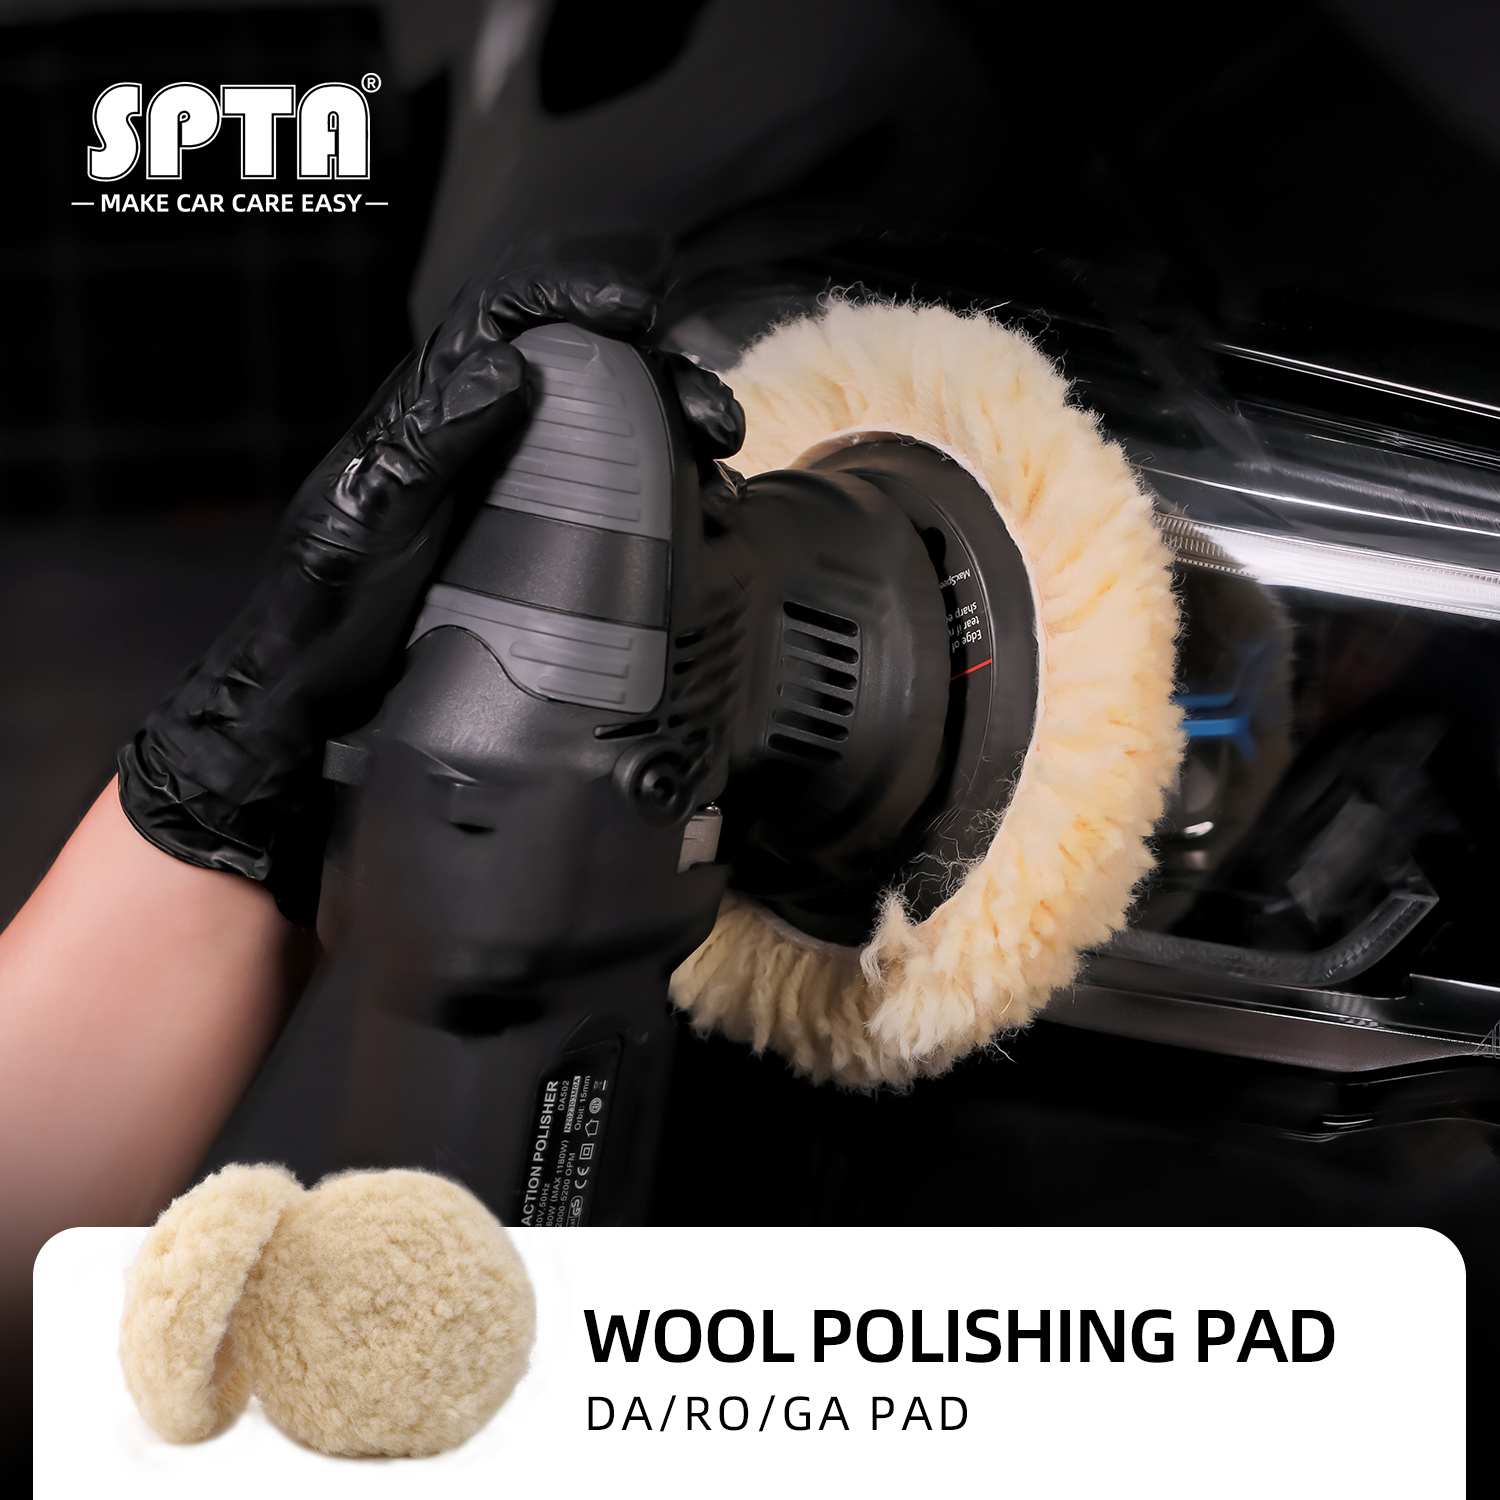 Carpet Brush for DA Polishers - Buffers, 5 Hook and Loop with 7/8